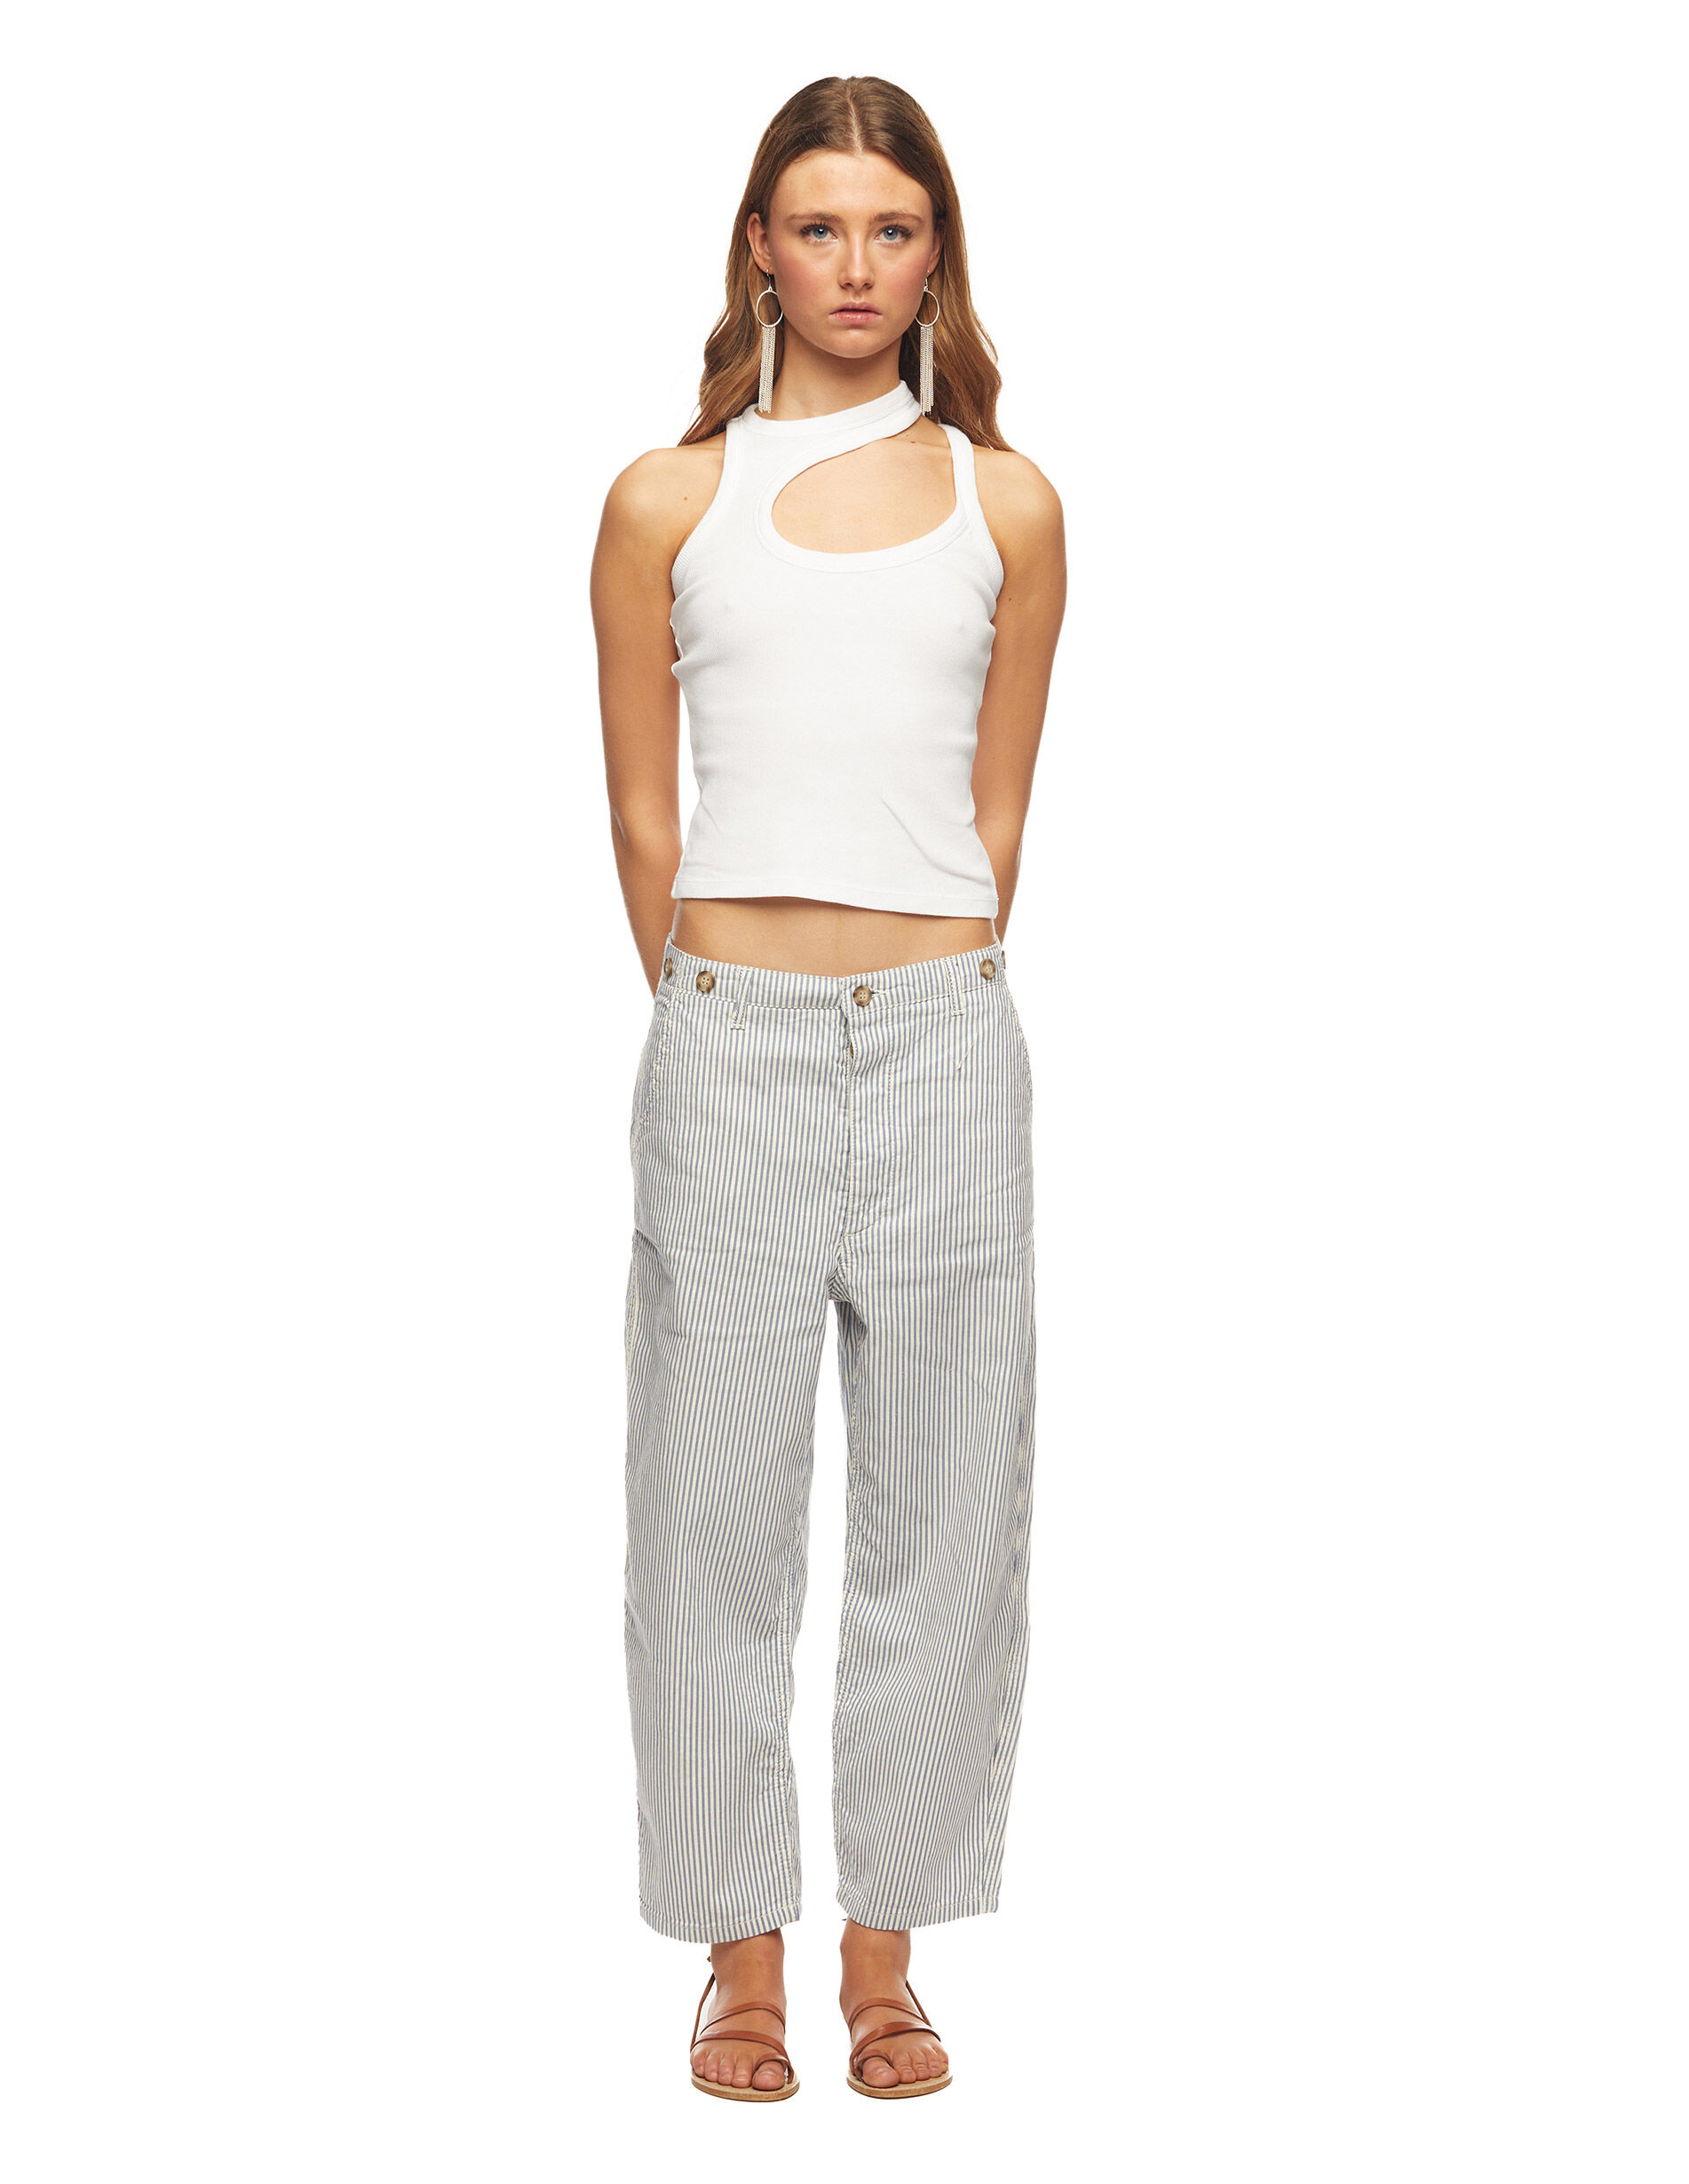 Linen-blend pull-on trousers - White/Blue striped - Ladies | H&M IN